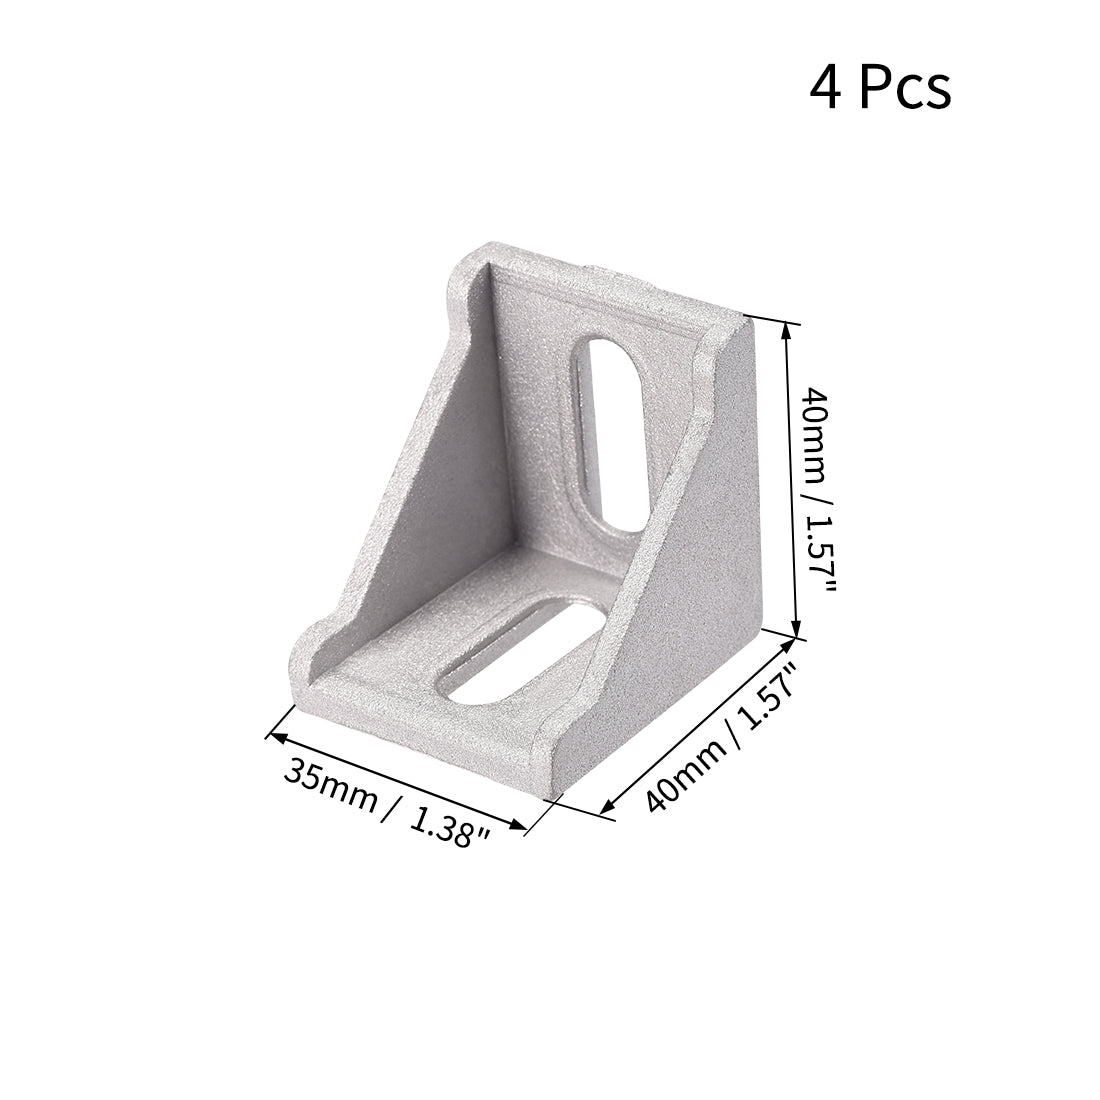 uxcell Uxcell Inside Corner Bracket Gusset, 40mm x 40mm for 4040 Series Aluminum Extrusion Profile with Slot 8mm, 4 Pcs (Silver)